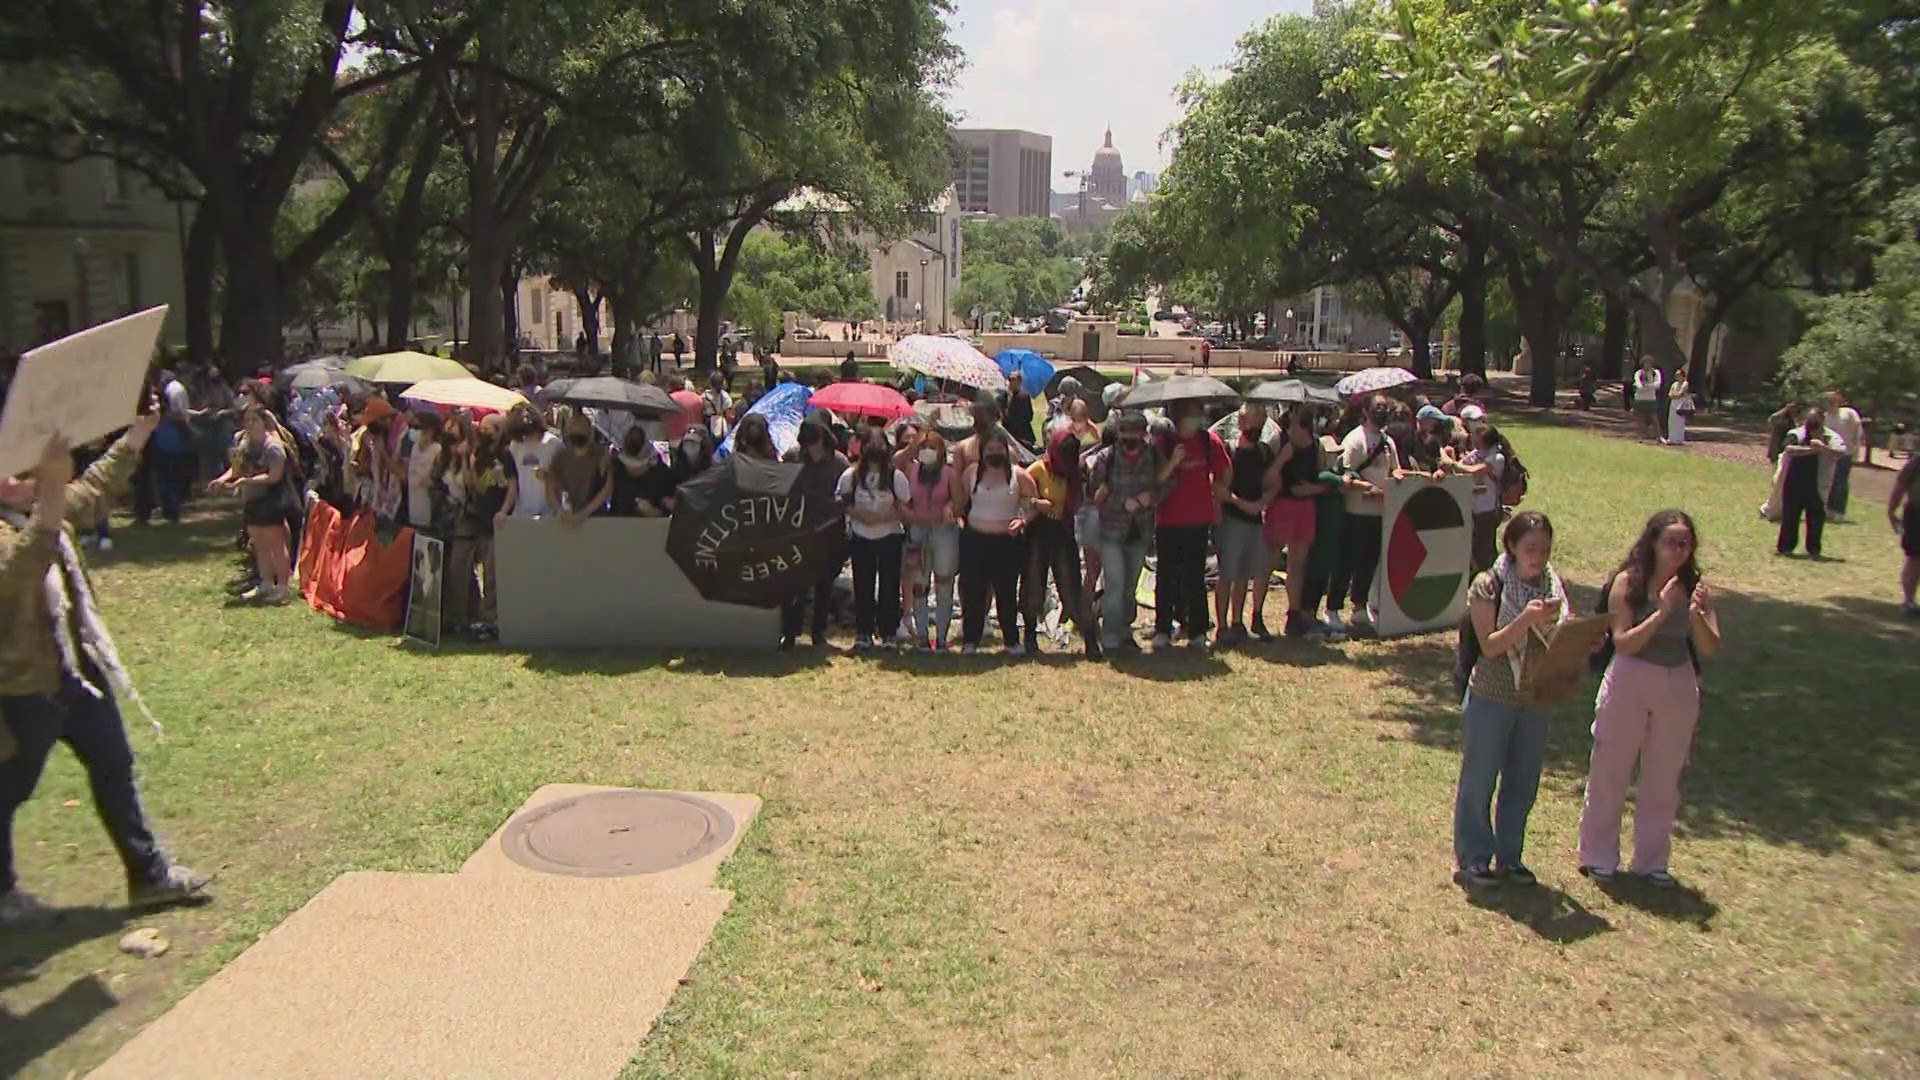 At the University of Texas in Austin, more than 100 people were arrested.